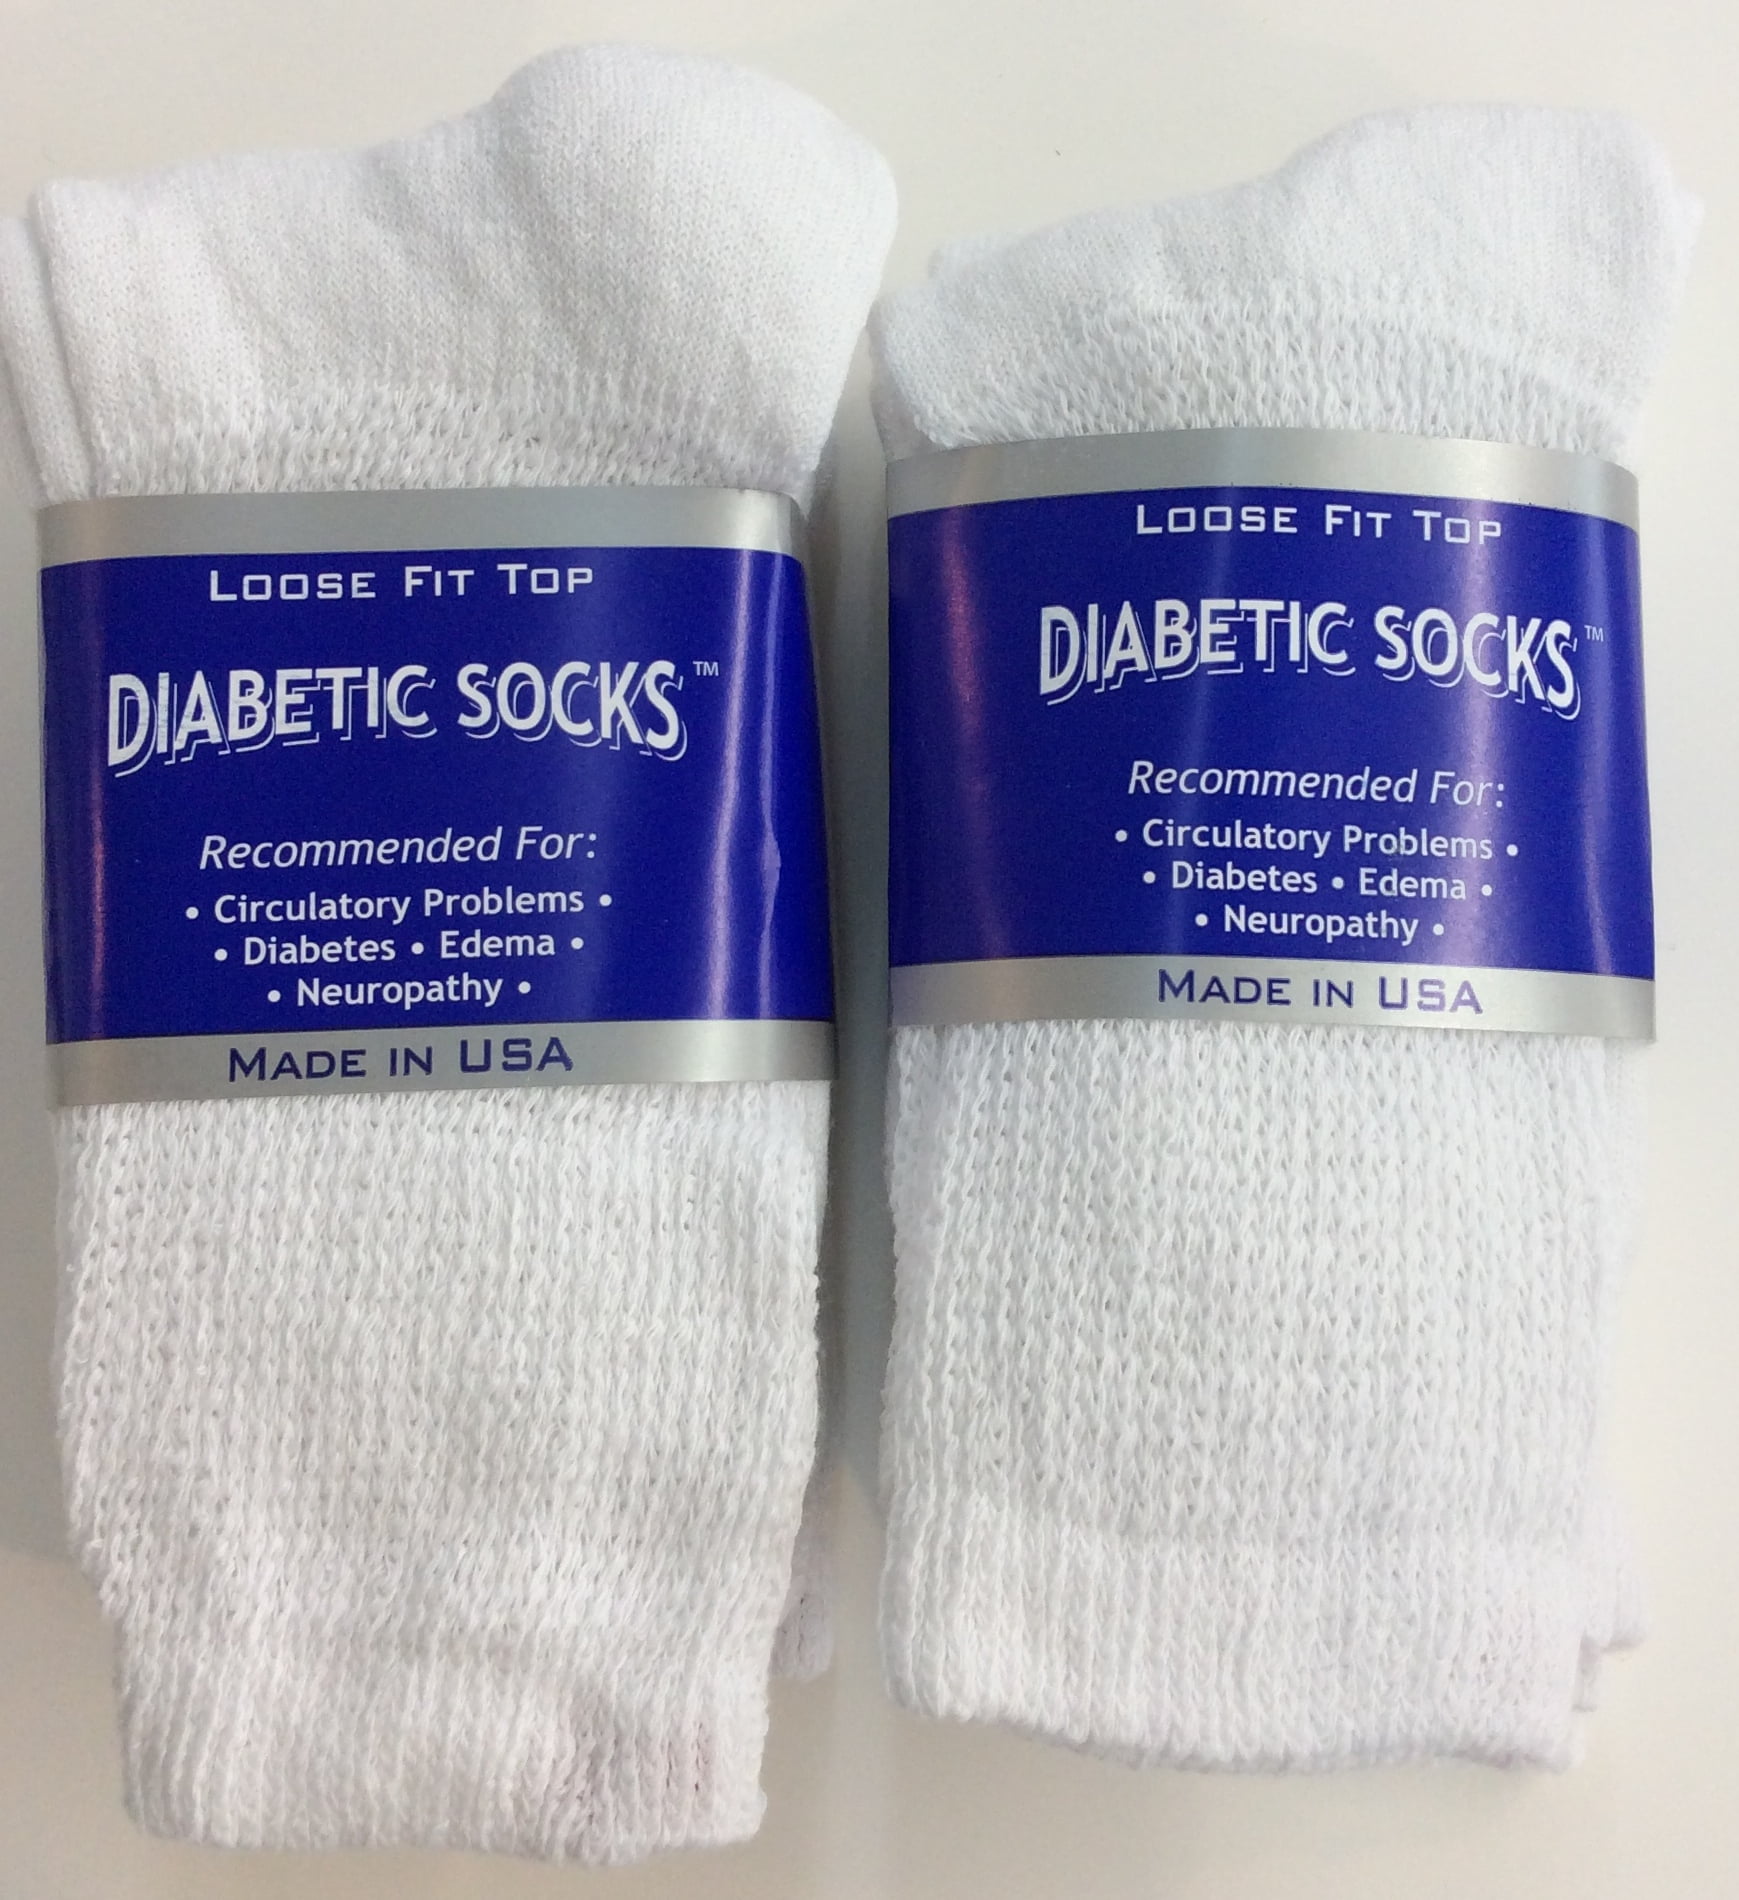 CASUAL WHITES DIABETIC CREW SOCKS 36 PAIR WHITE SIZE 10-13   MADE IN U.S.A 